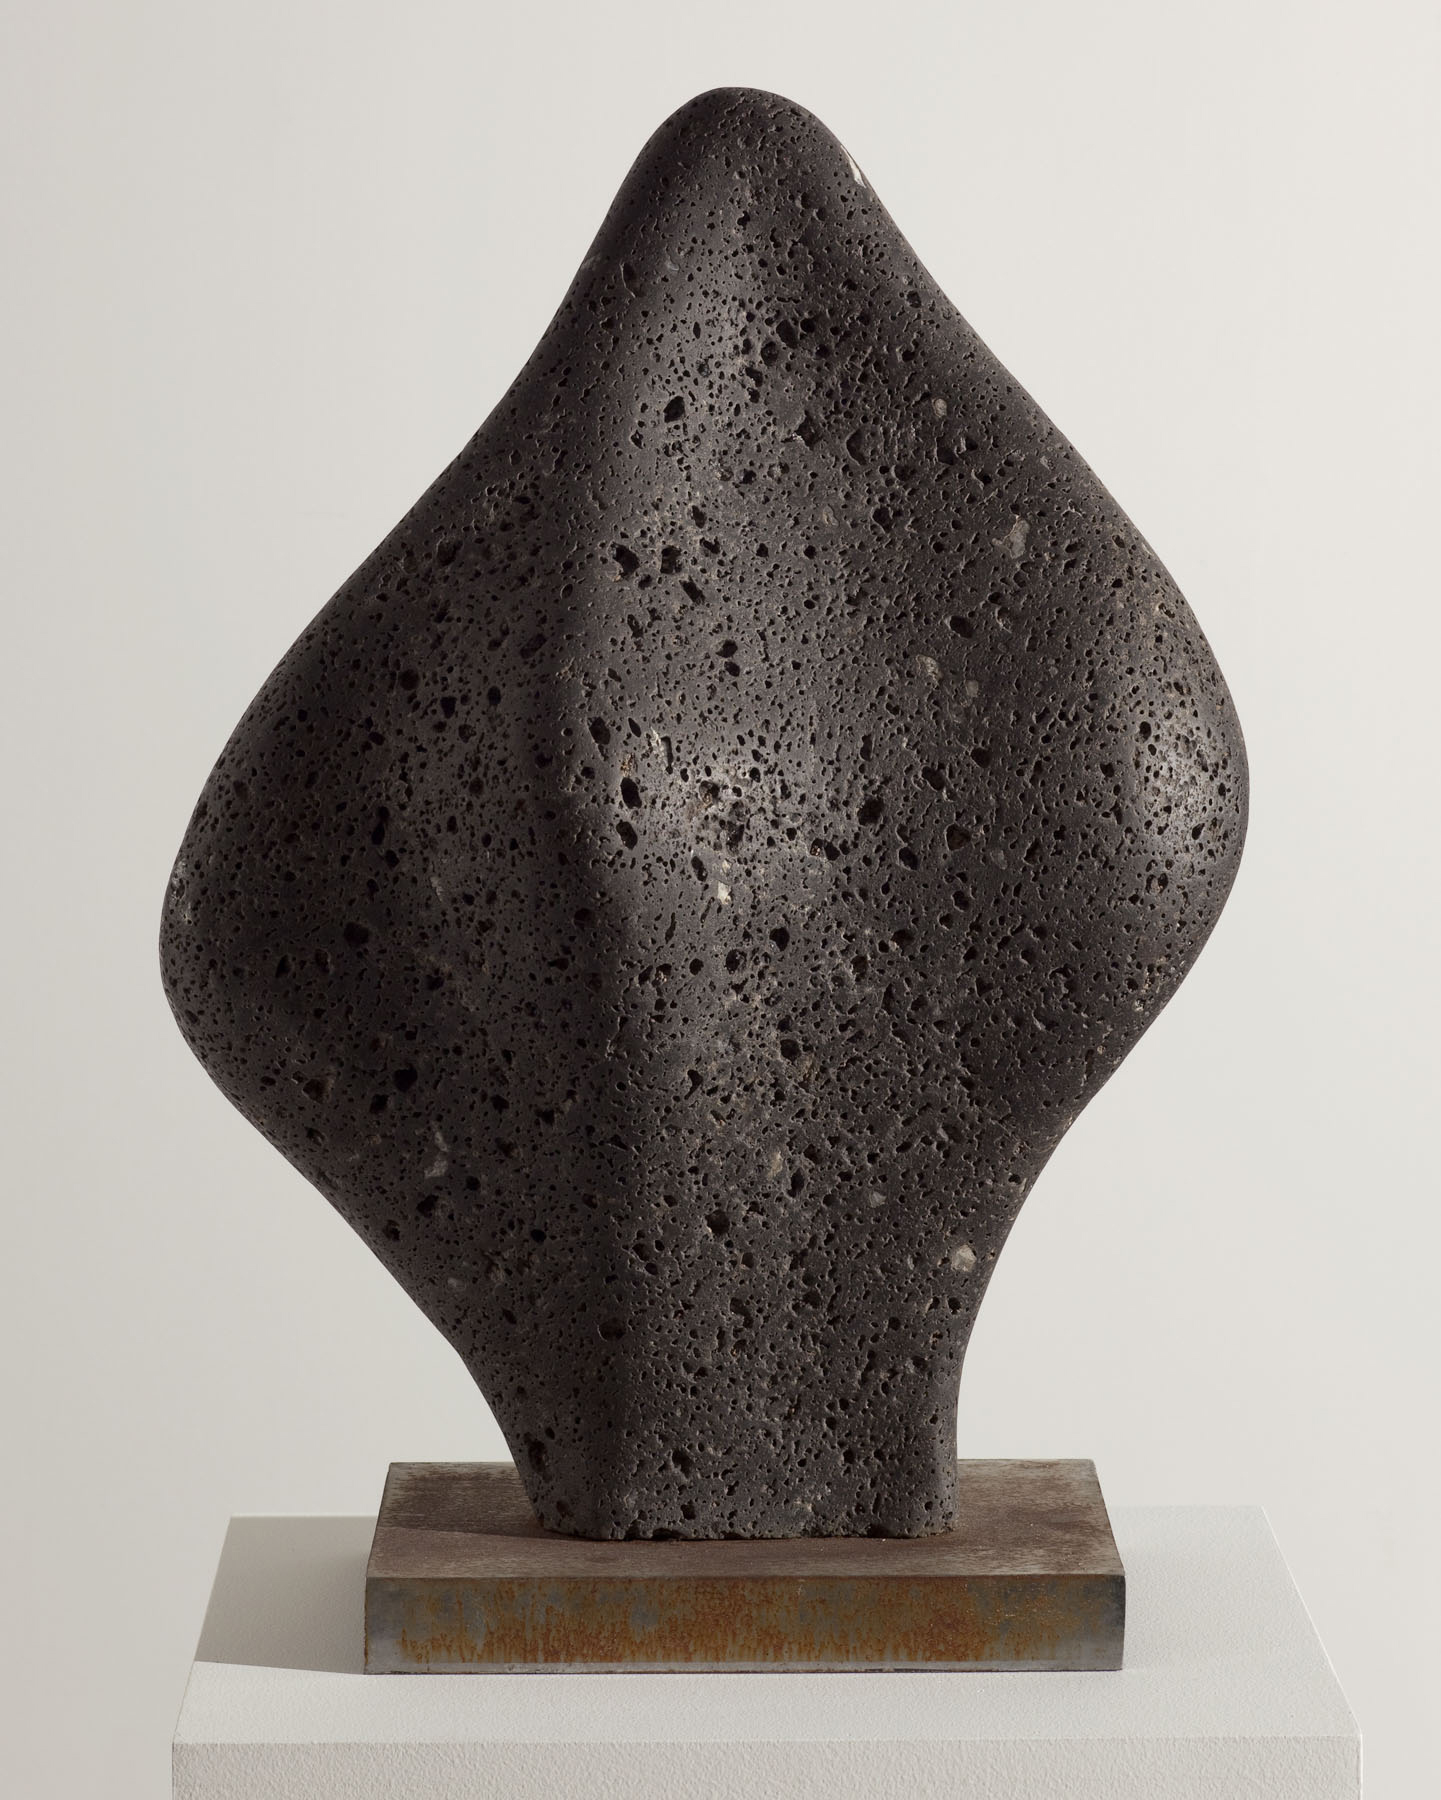 Organically-shaped black stone sculpture with a porous surface.